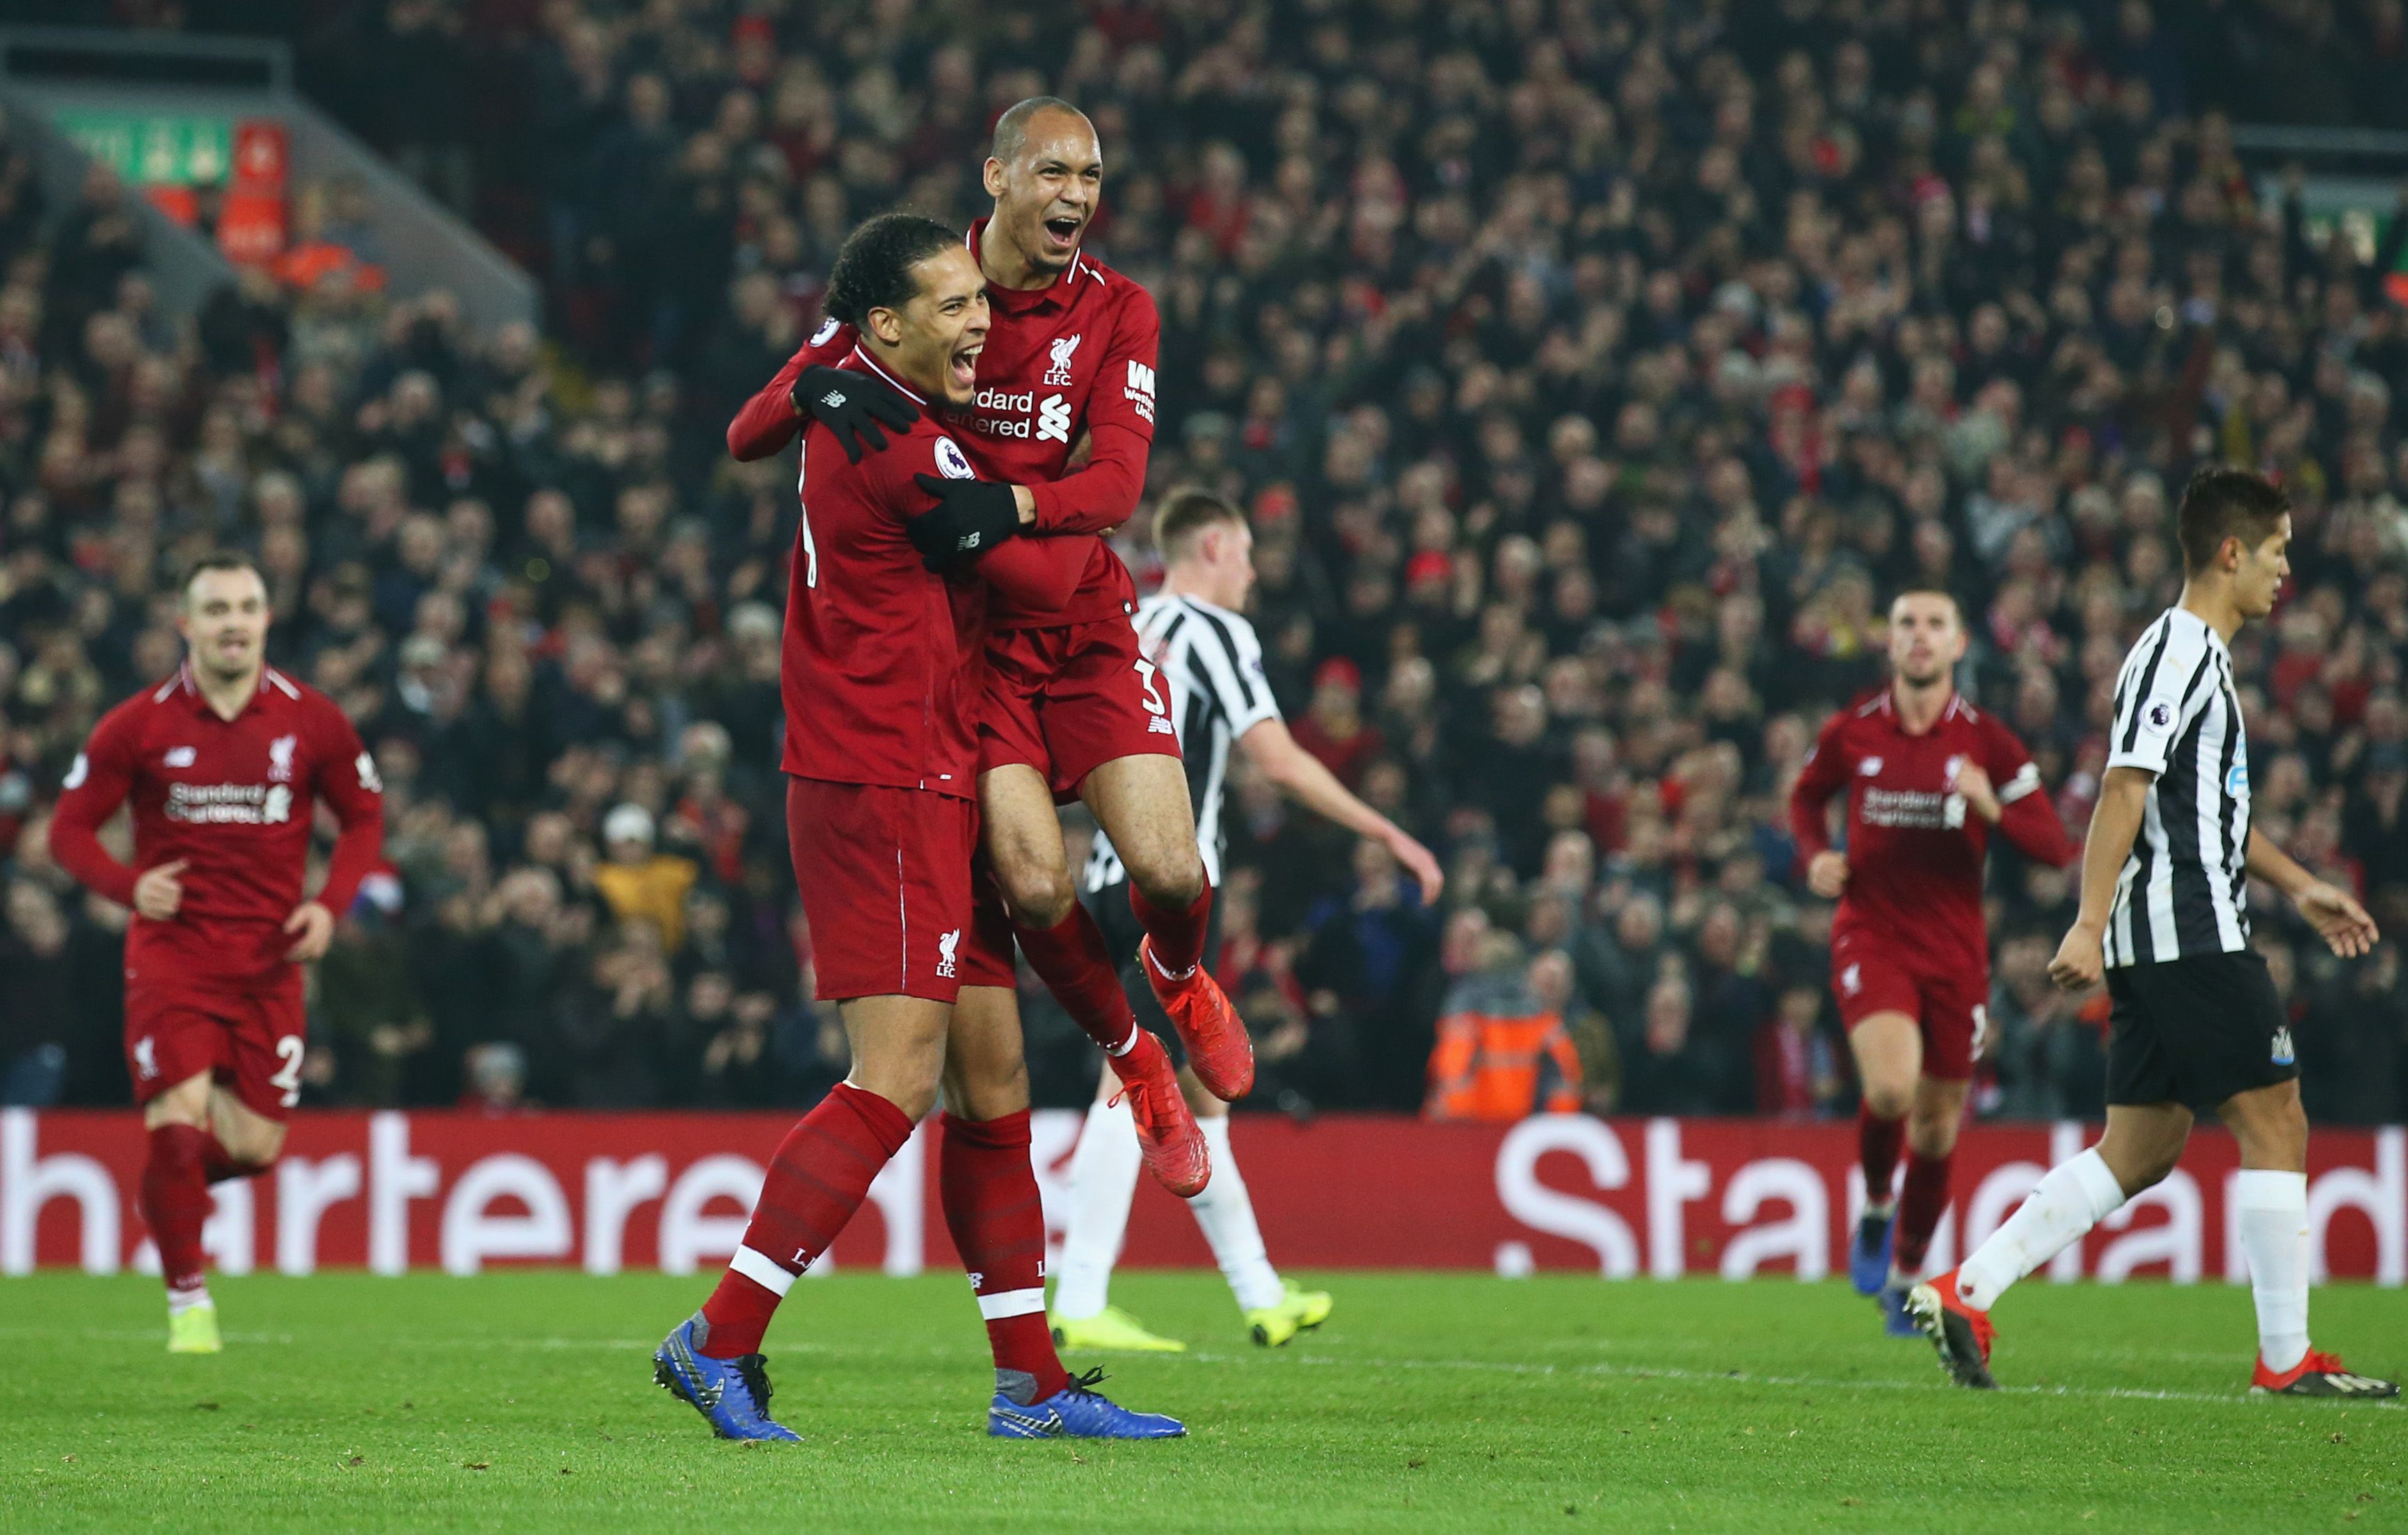 LIVERPOOL, ENGLAND - DECEMBER 26: Fabinho of Liverpool celebrates after scoring his team's fourth goal with team mate Virgil van Dijk during the Premier League match between Liverpool FC and Newcastle United at Anfield on December 26, 2018 in Liverpool, United Kingdom. (Photo by Jan Kruger/Getty Images)